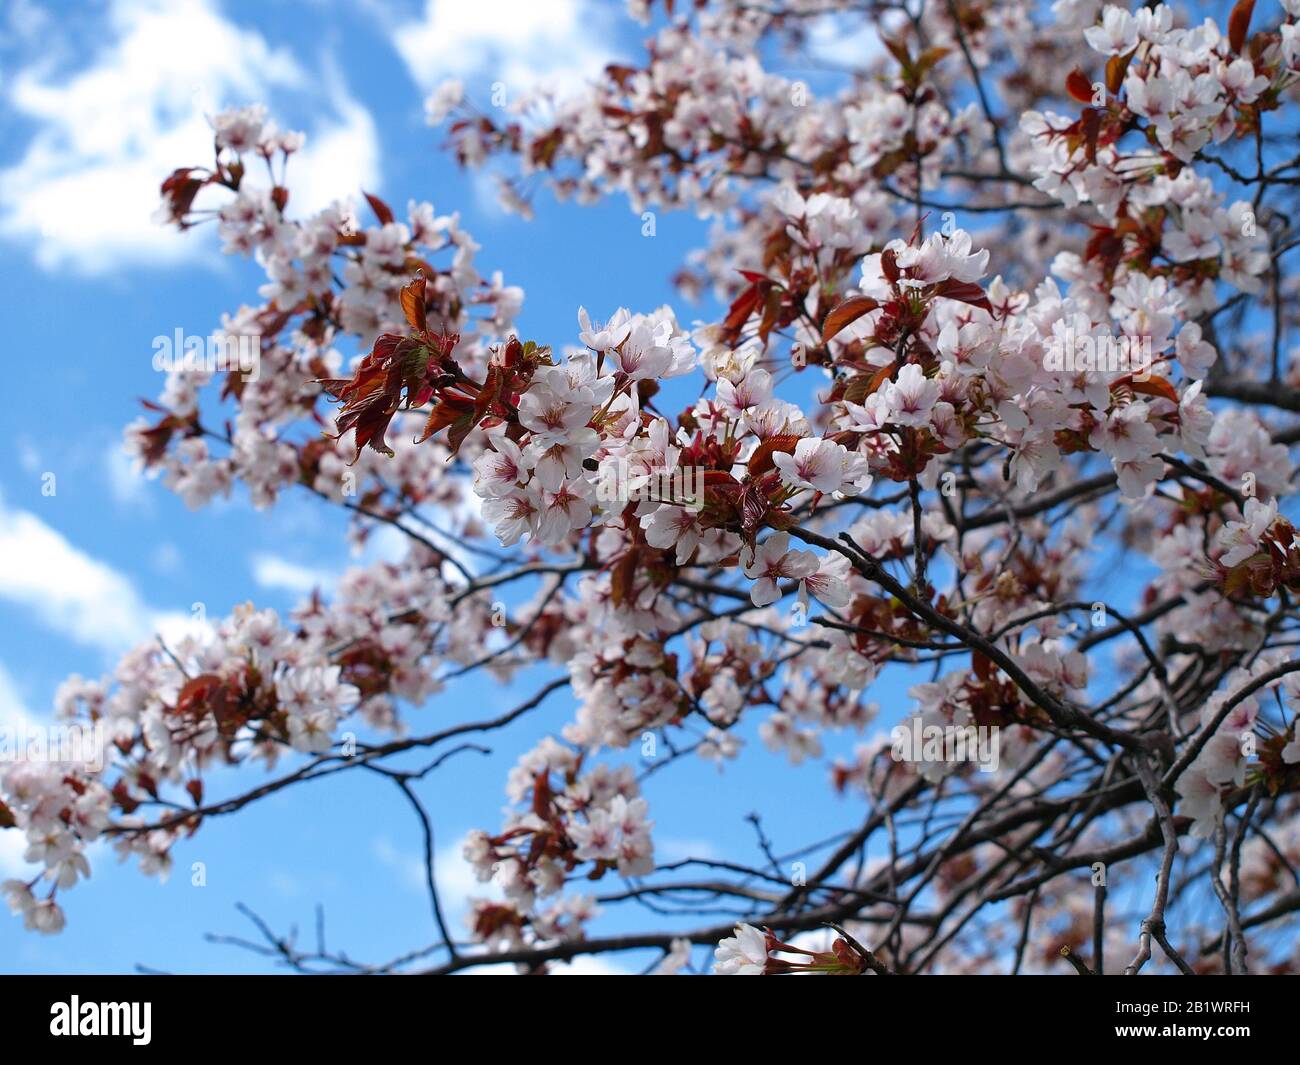 fruit and berry trees bloom in the spring Stock Photo